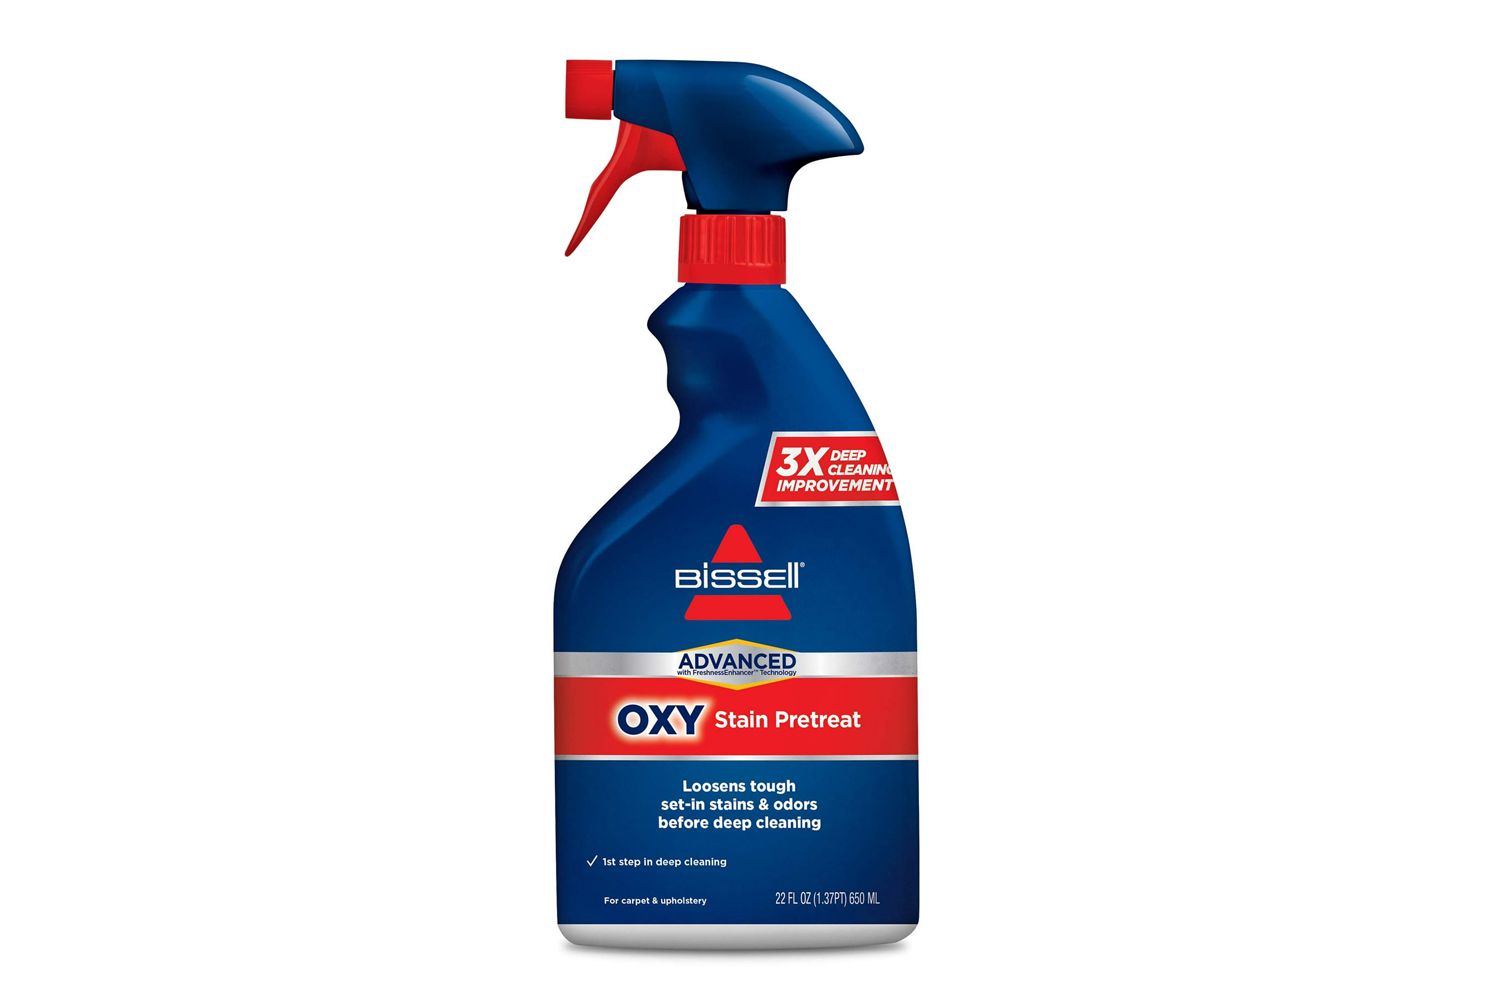 Bissell Advanced Oxy Stain Pretreat